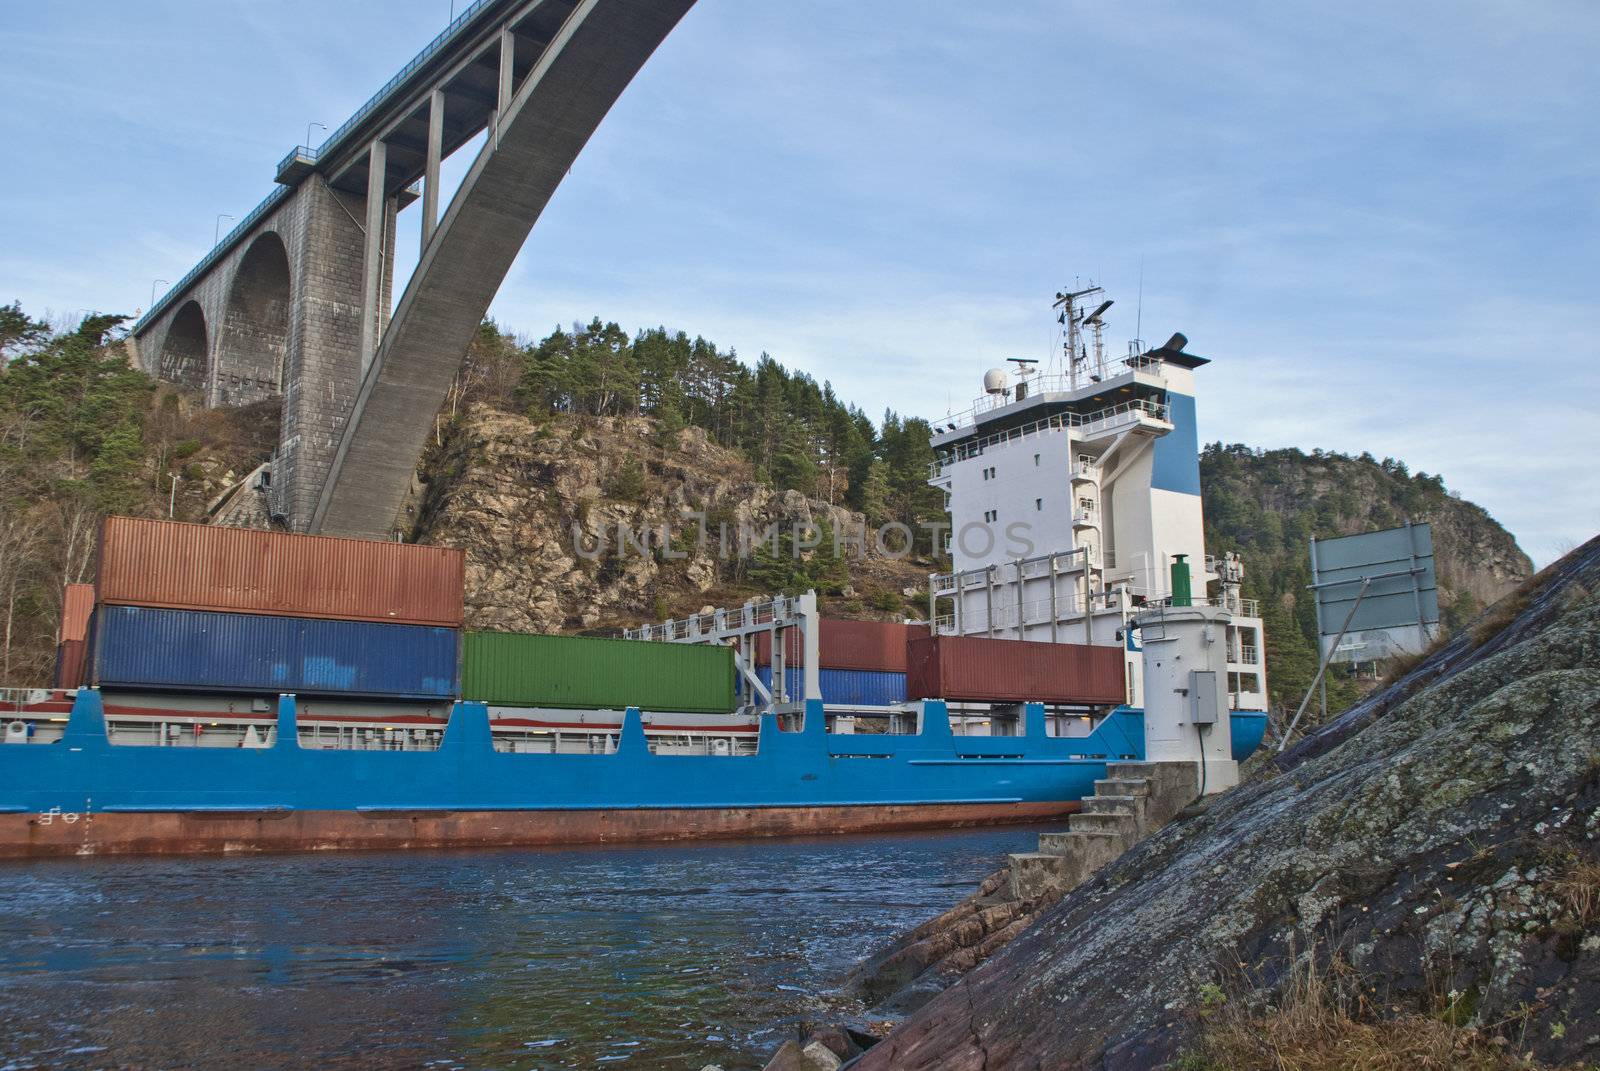 while i'm under svinesund bridge (which is a bridge that borders between norway and sweden) shows the container ship elisabeth up behind a rock and i get shot some really good pictures, some facts about elisabeth: ship type: container ship, length x breadth: 119 m X 20 m, flag: netherlands [nl]